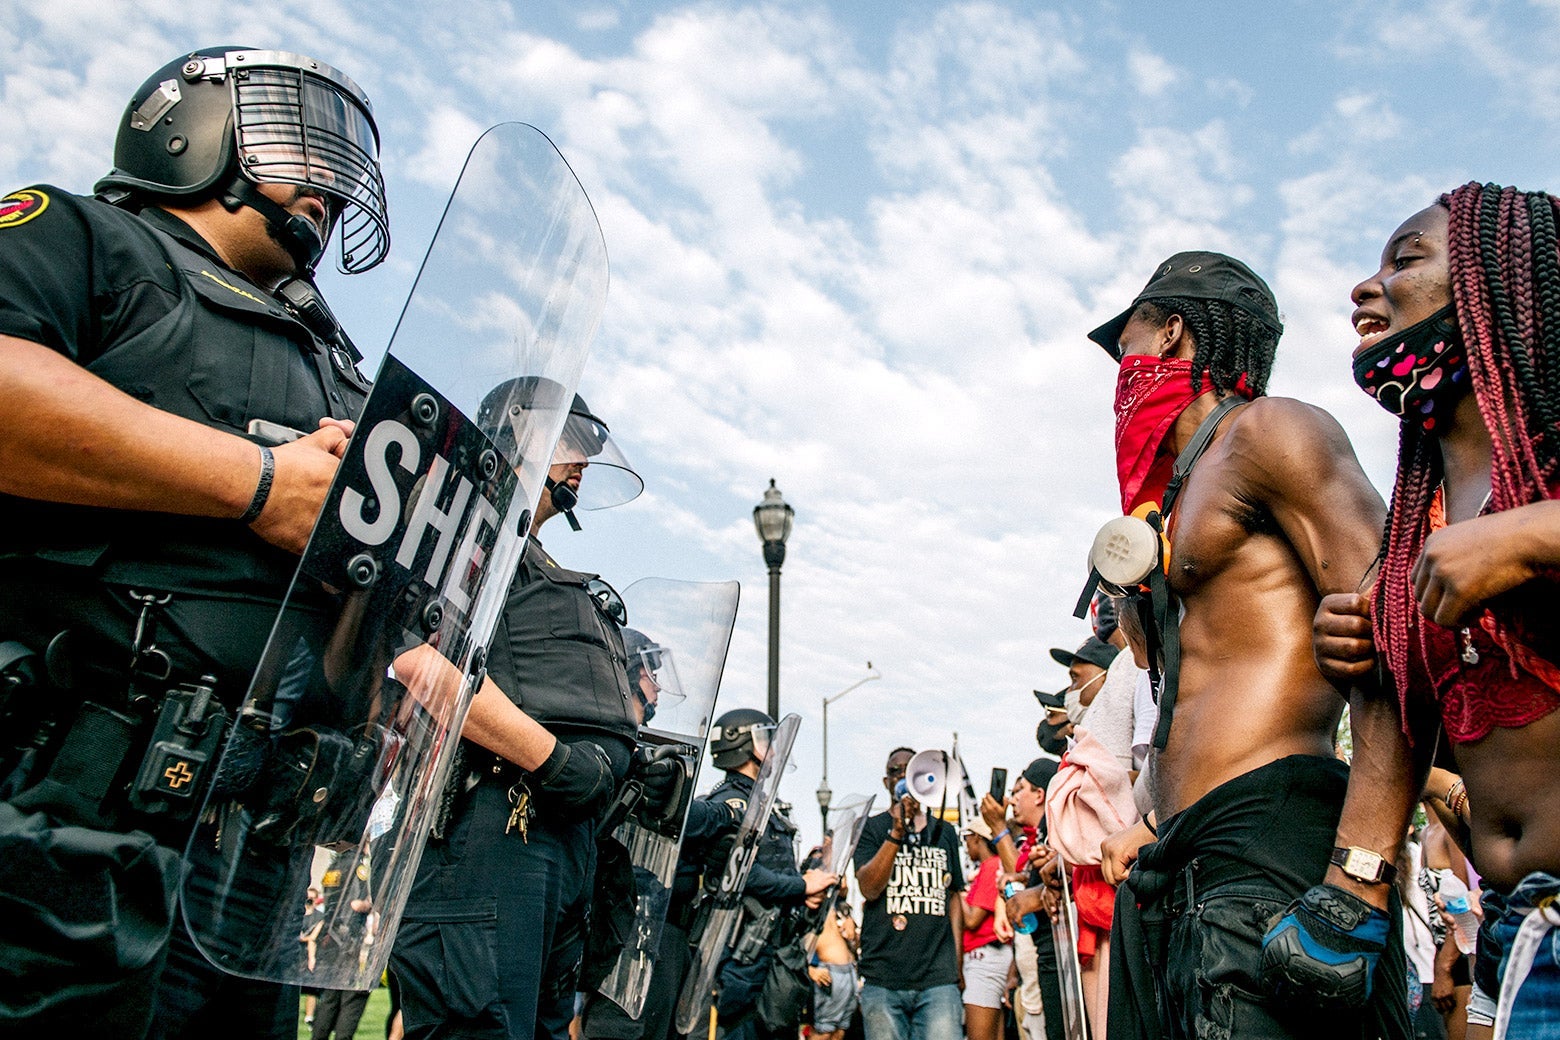 Police in riot gear face off against Black Lives Matter protesters